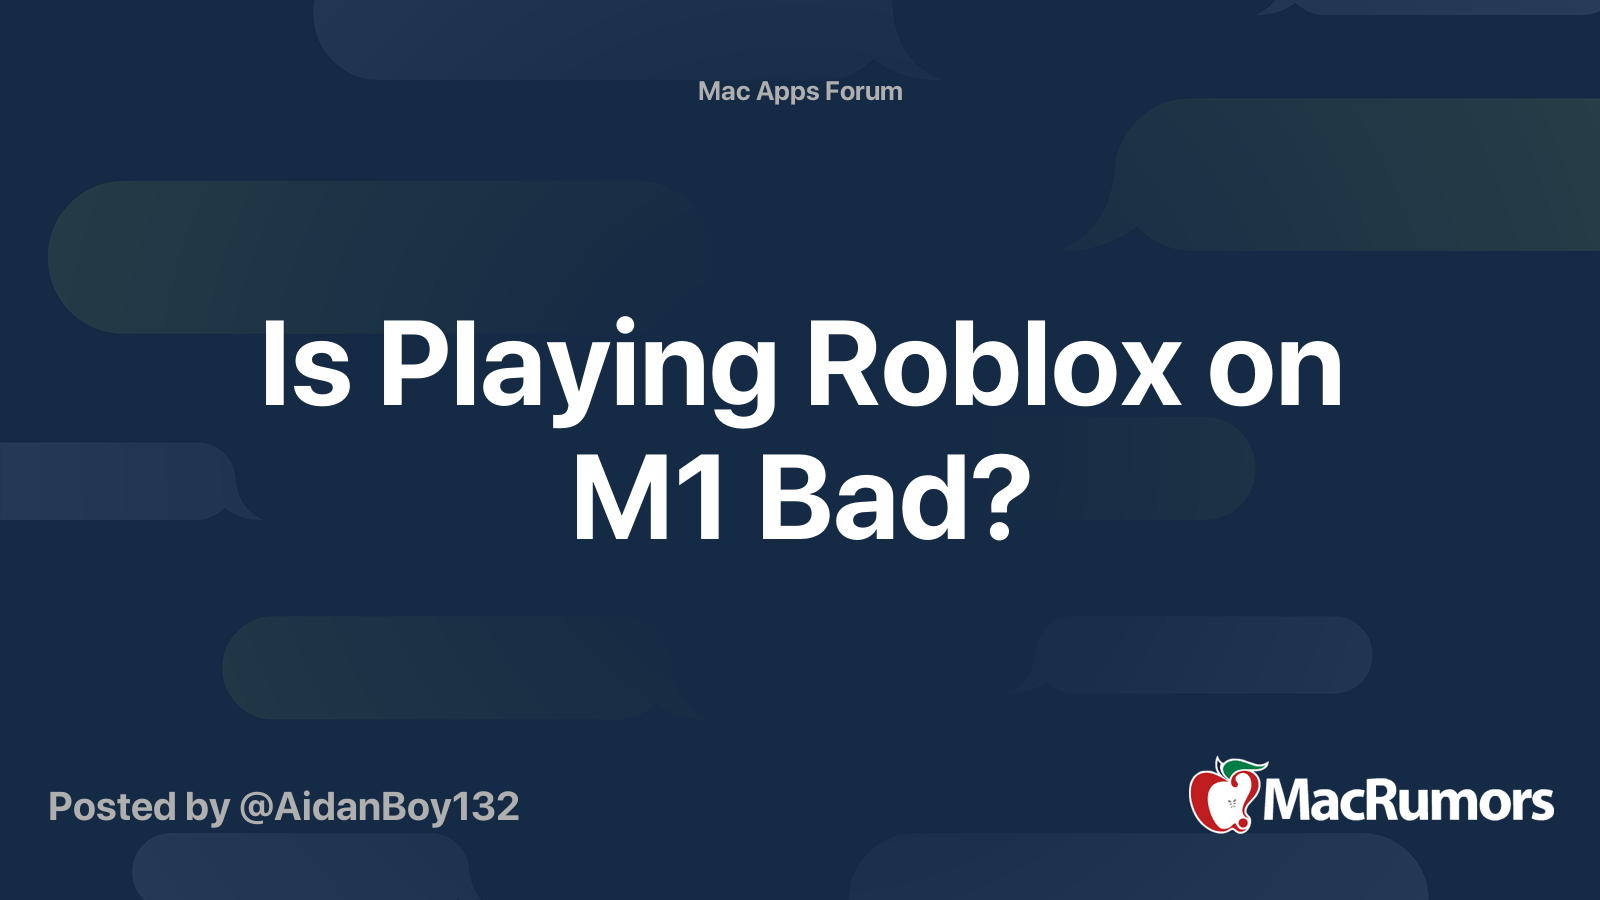 Is Playing Roblox on M1 Bad?